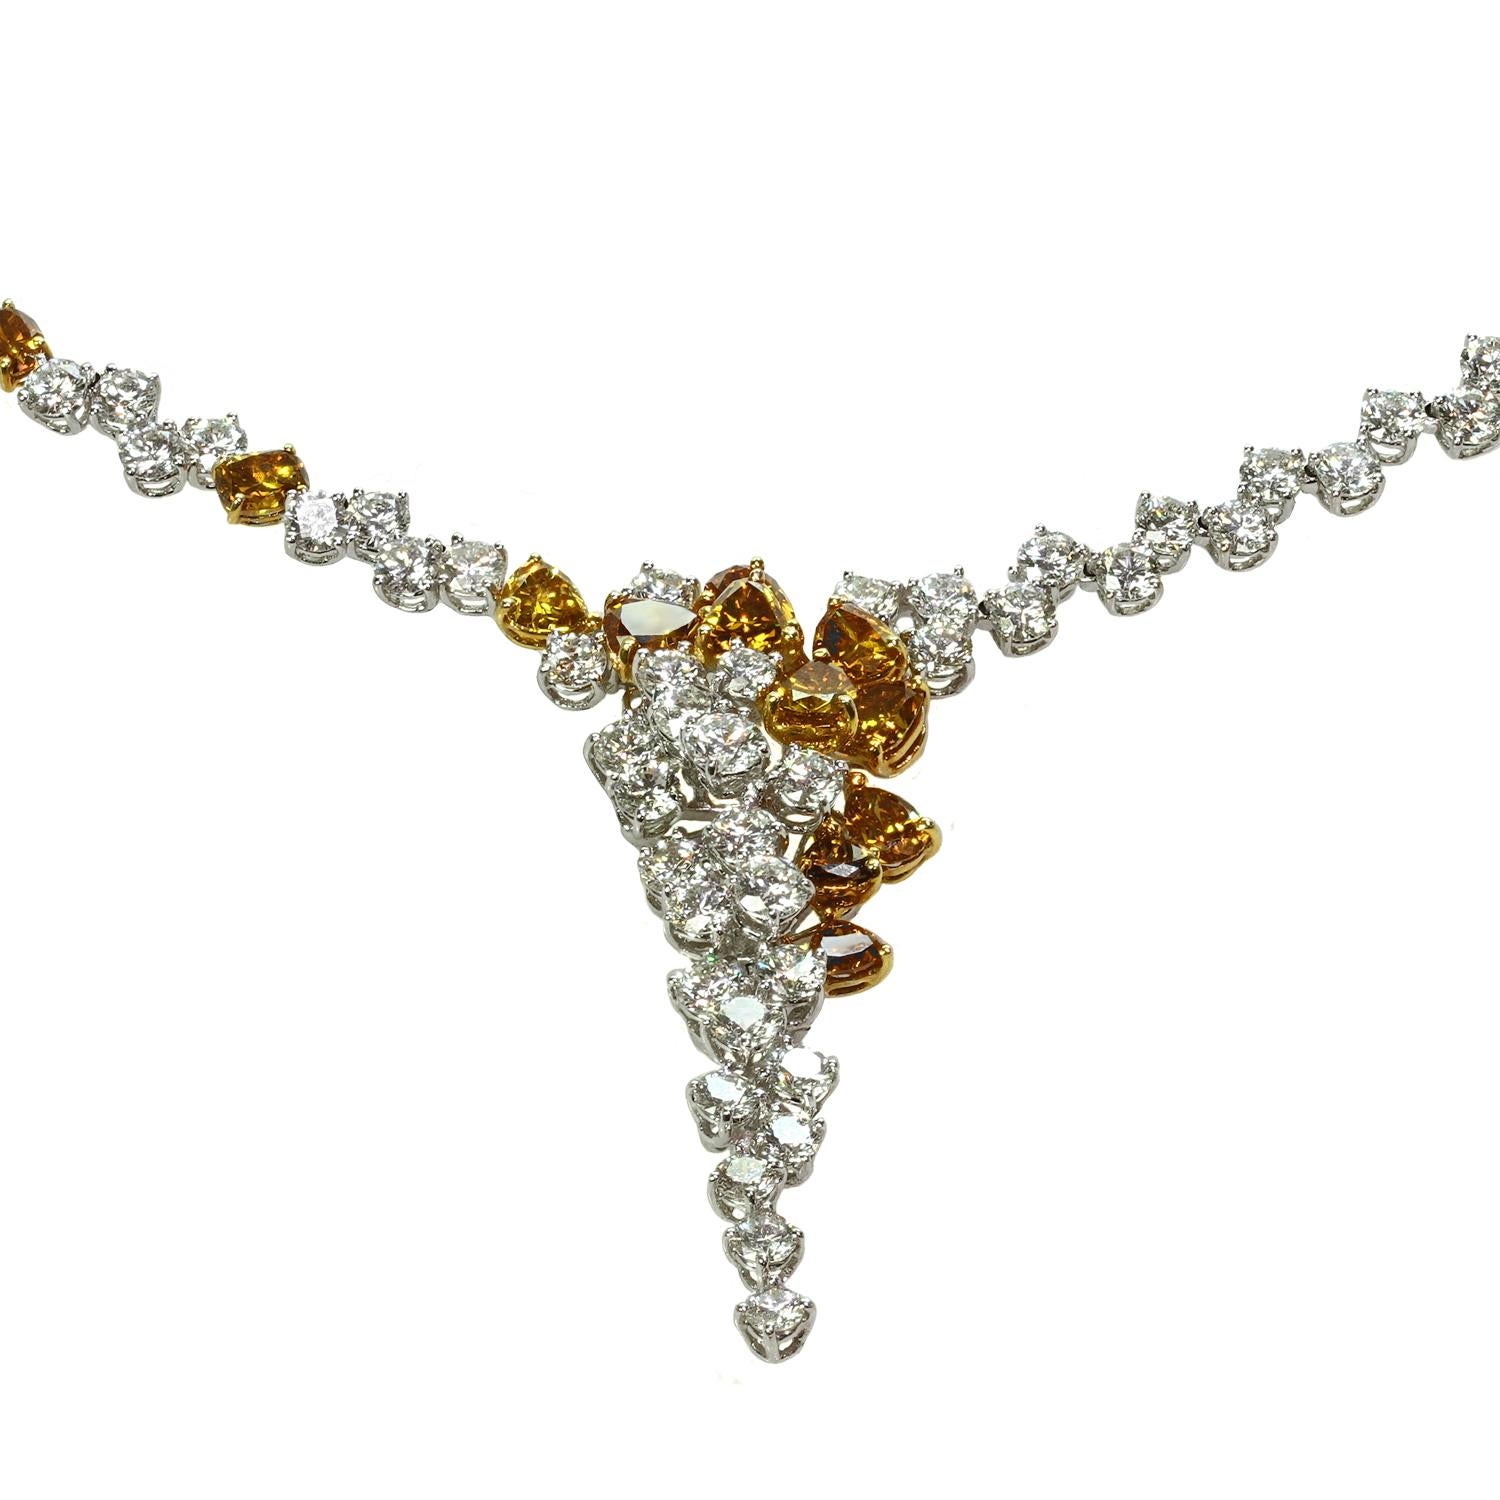 This lavish cascade necklace is exquisitely crafted out of 18k white gold and features 22 intensely vivid fancy orange diamonds totaling 7.6 carats in weight and 154 white diamonds totaling 24.72 carats in weight. Measurements: 17